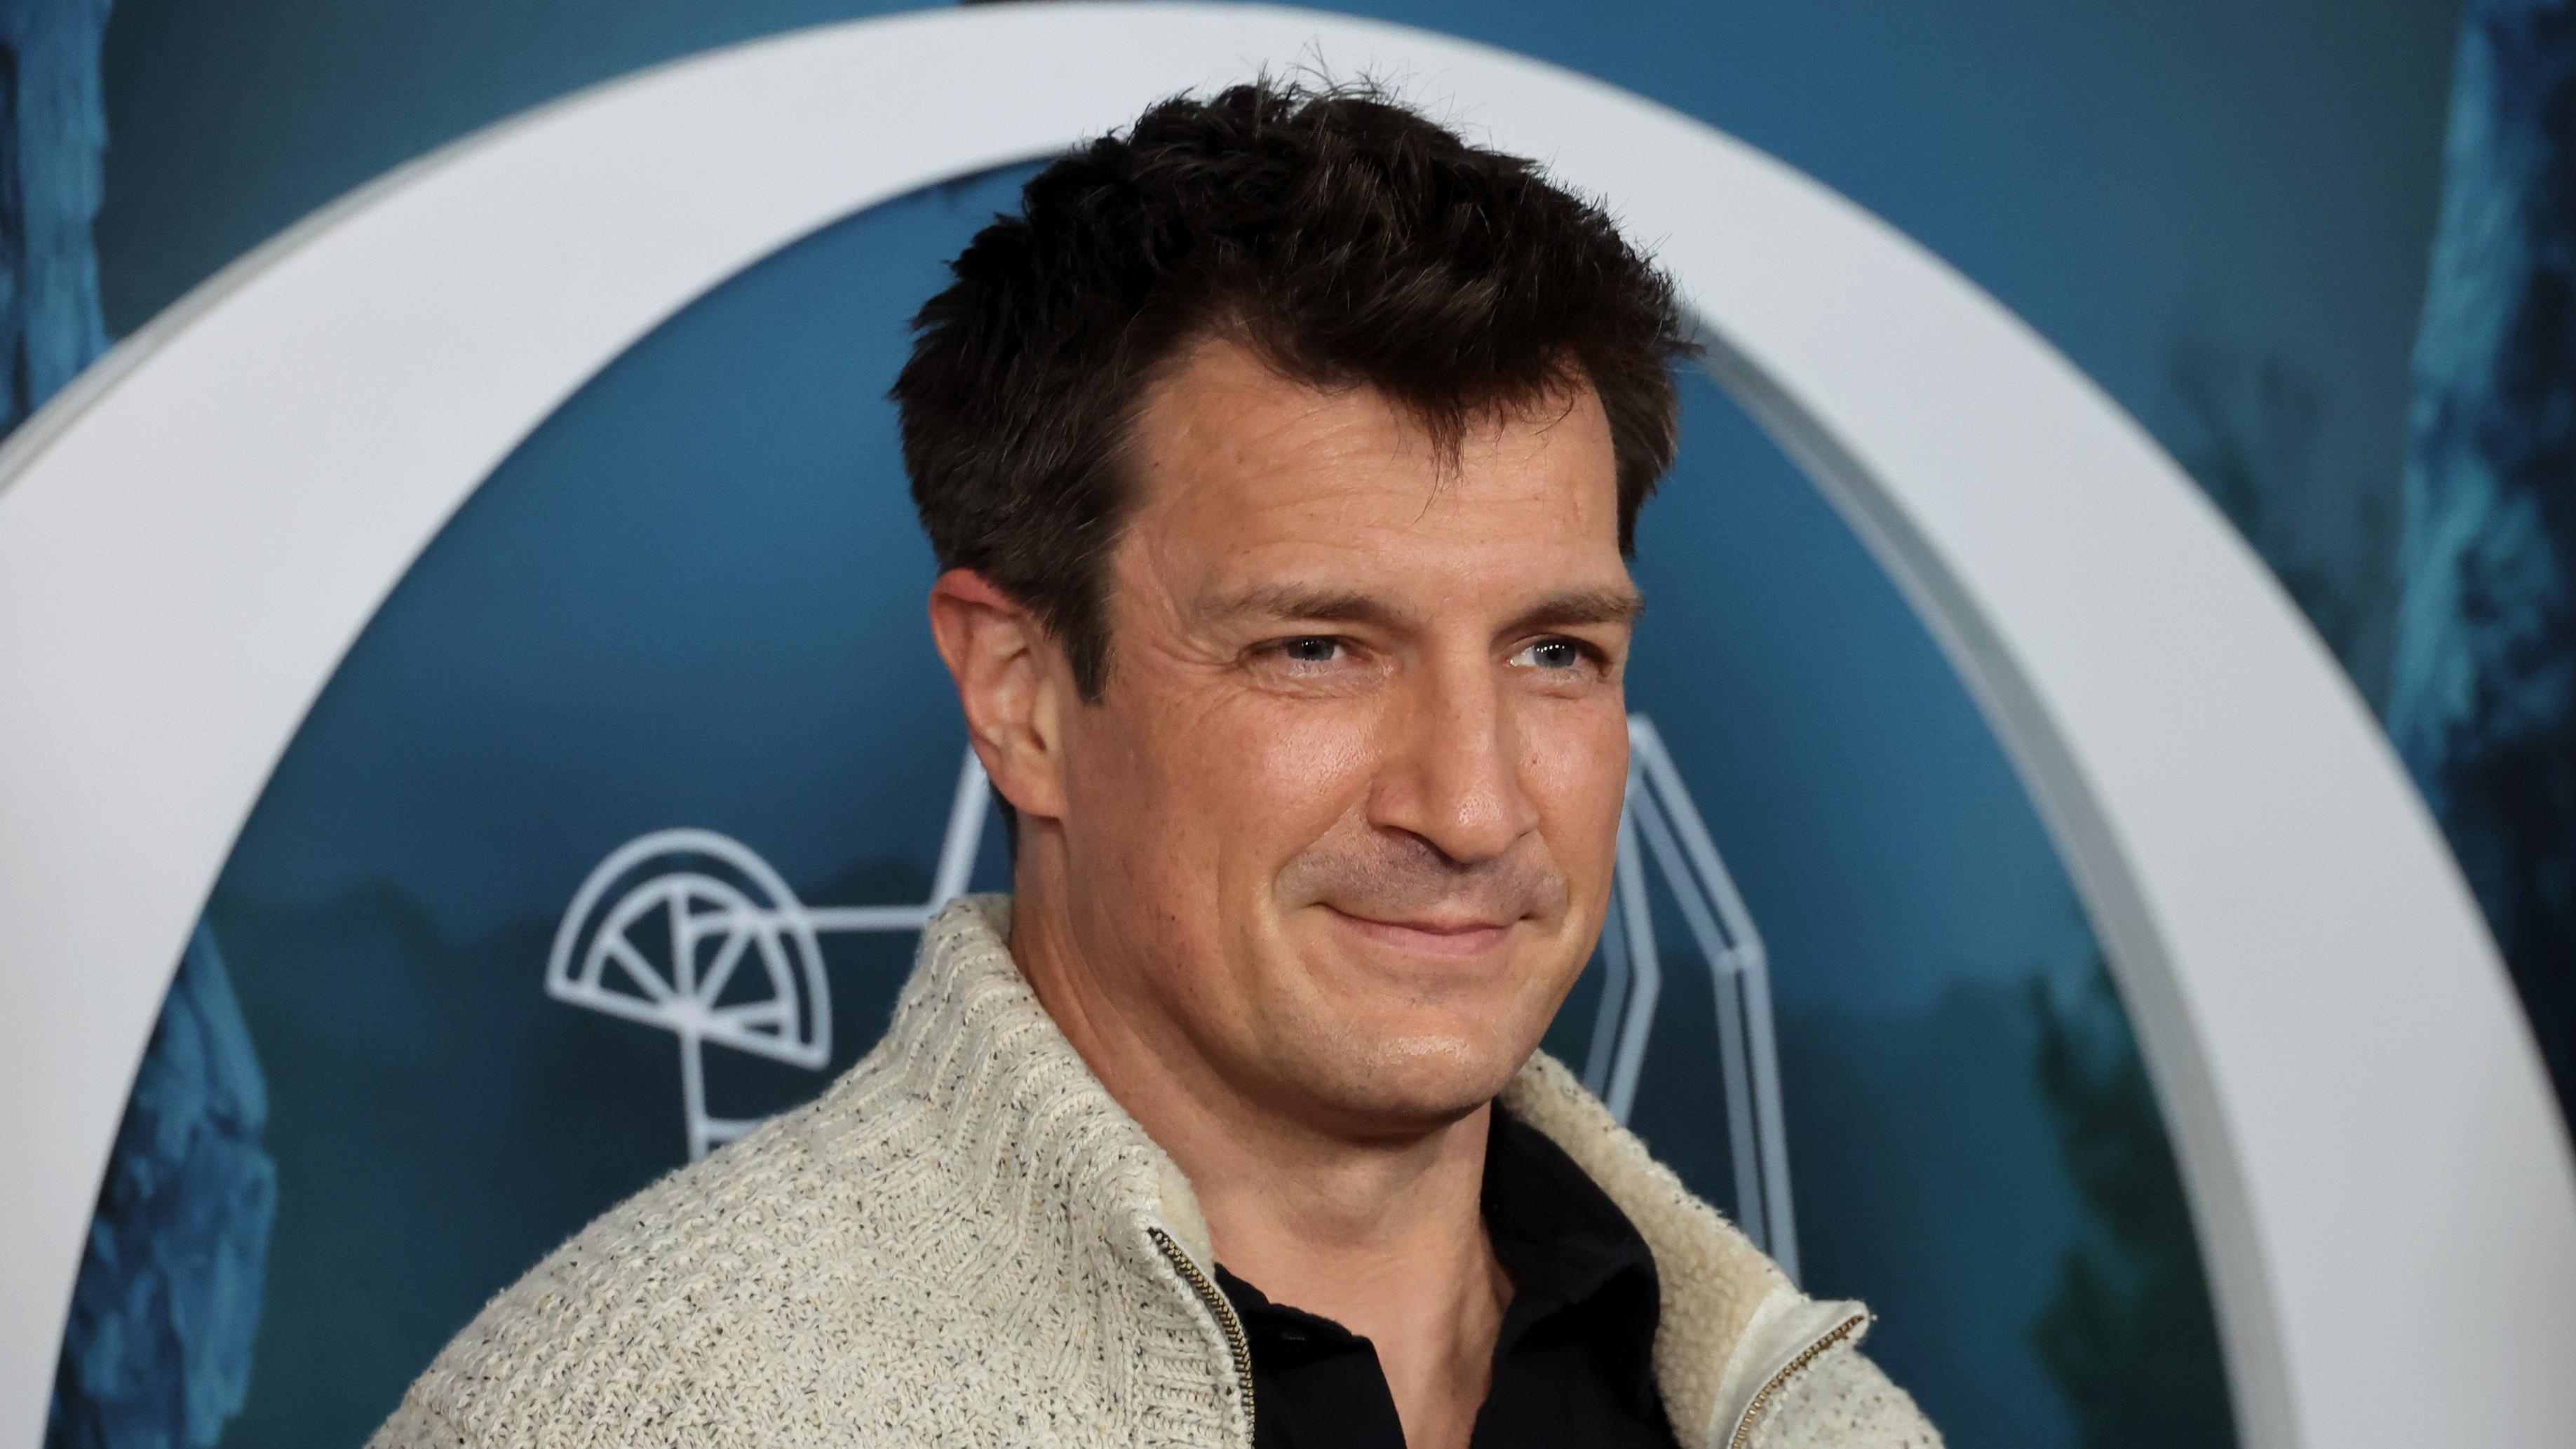 Nathan Fillion says he would work with Joss Whedon again “in a second”